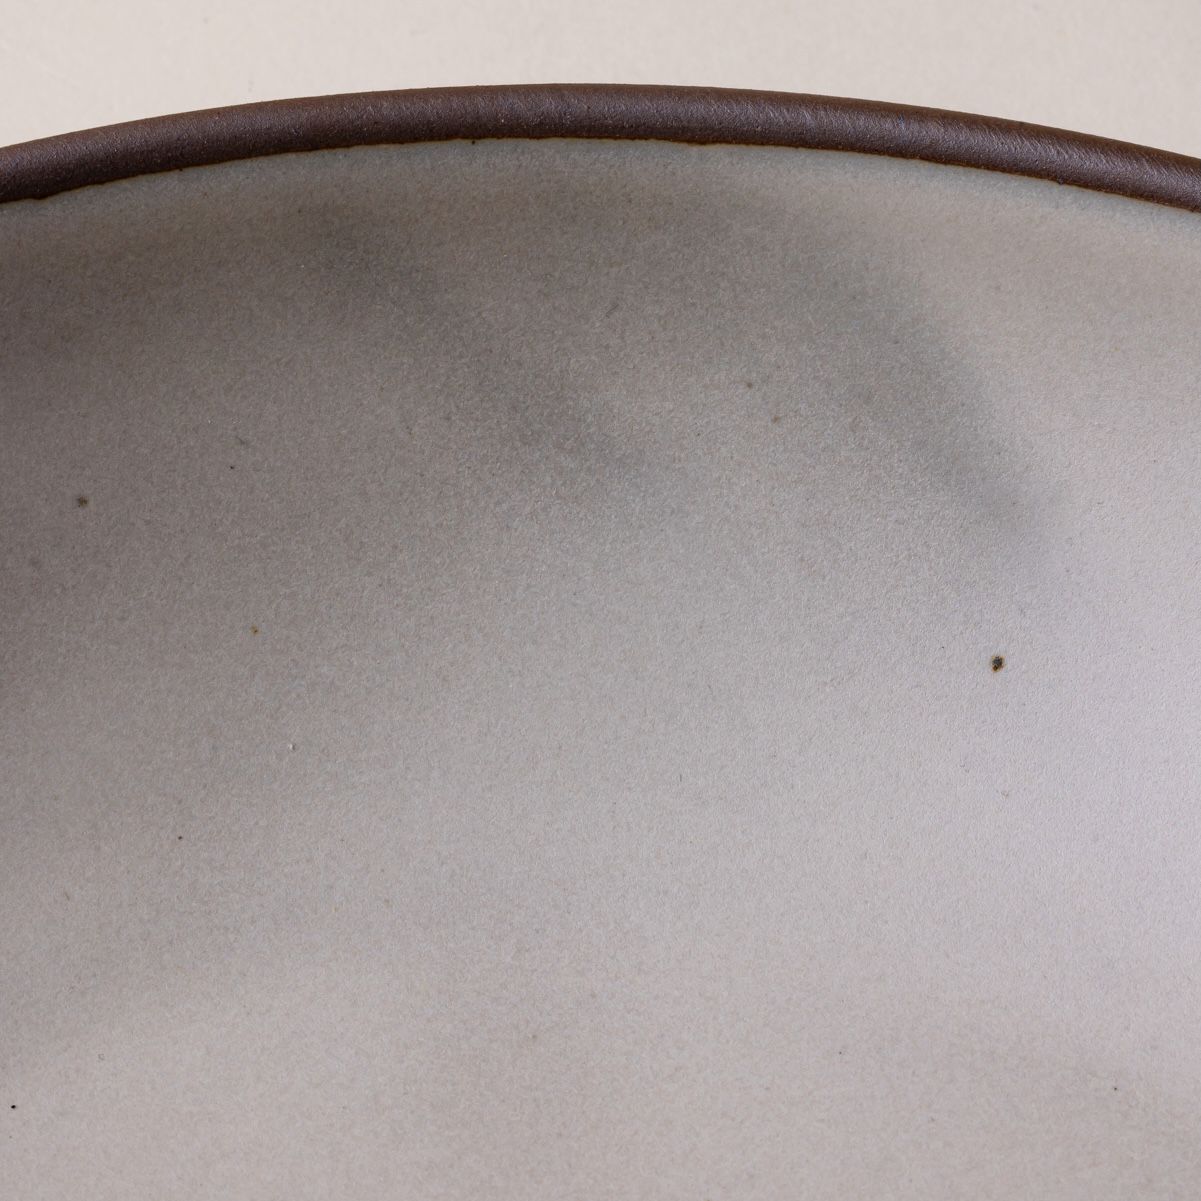 Streaky glaze on a ceramic bowl in a cool white color.